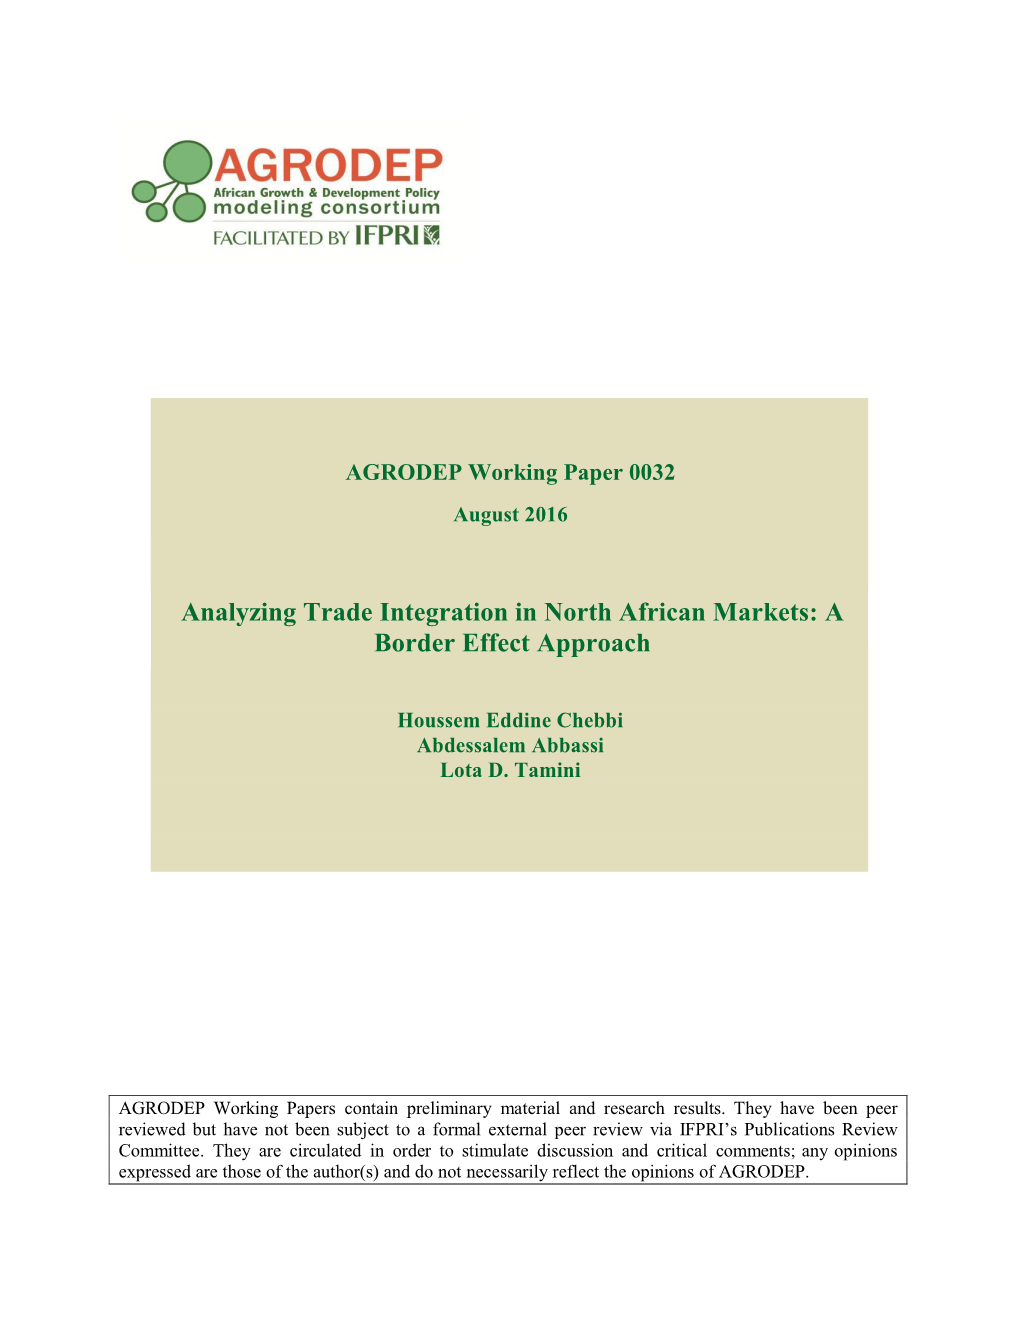 Analyzing Trade Integration in North African Markets: a Border Effect Approach